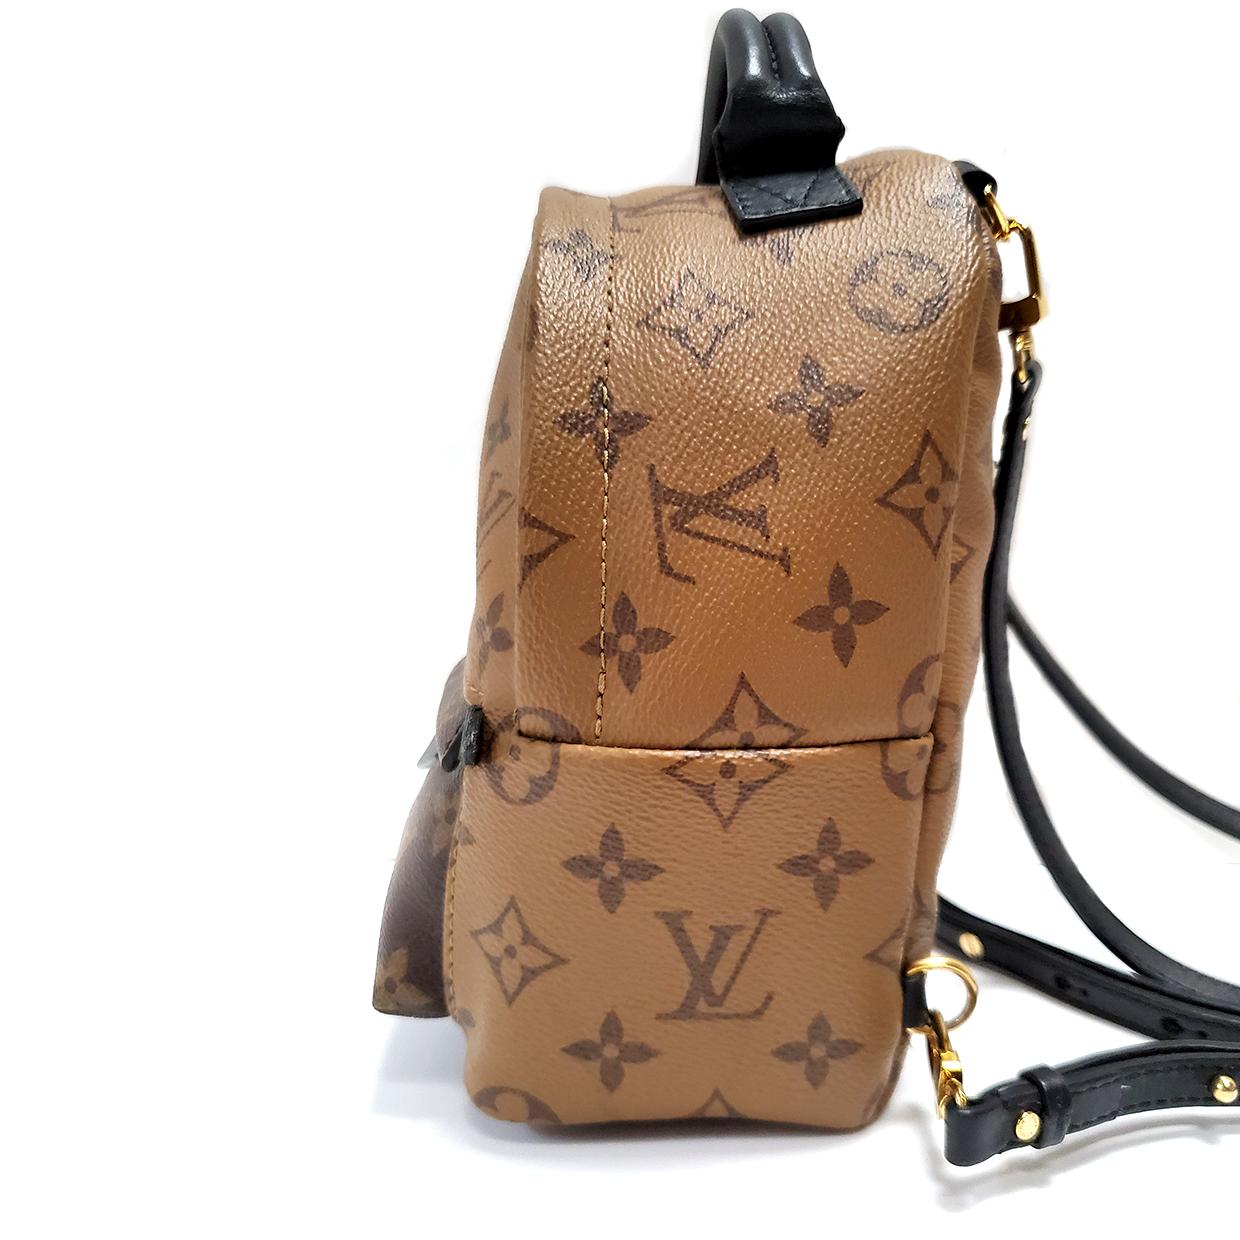 Brand - Louis Vuitton
Collection - Palm Springs
Estimated Retail - $2,140.00
Style - Backpack
Material - Canvas
Color - Brown
Pattern - Monogram
Closure - Zip
Hardware Material - Goldtone
Model/Date Code - FL4126
Comes With - Box, Dustbag
Size -